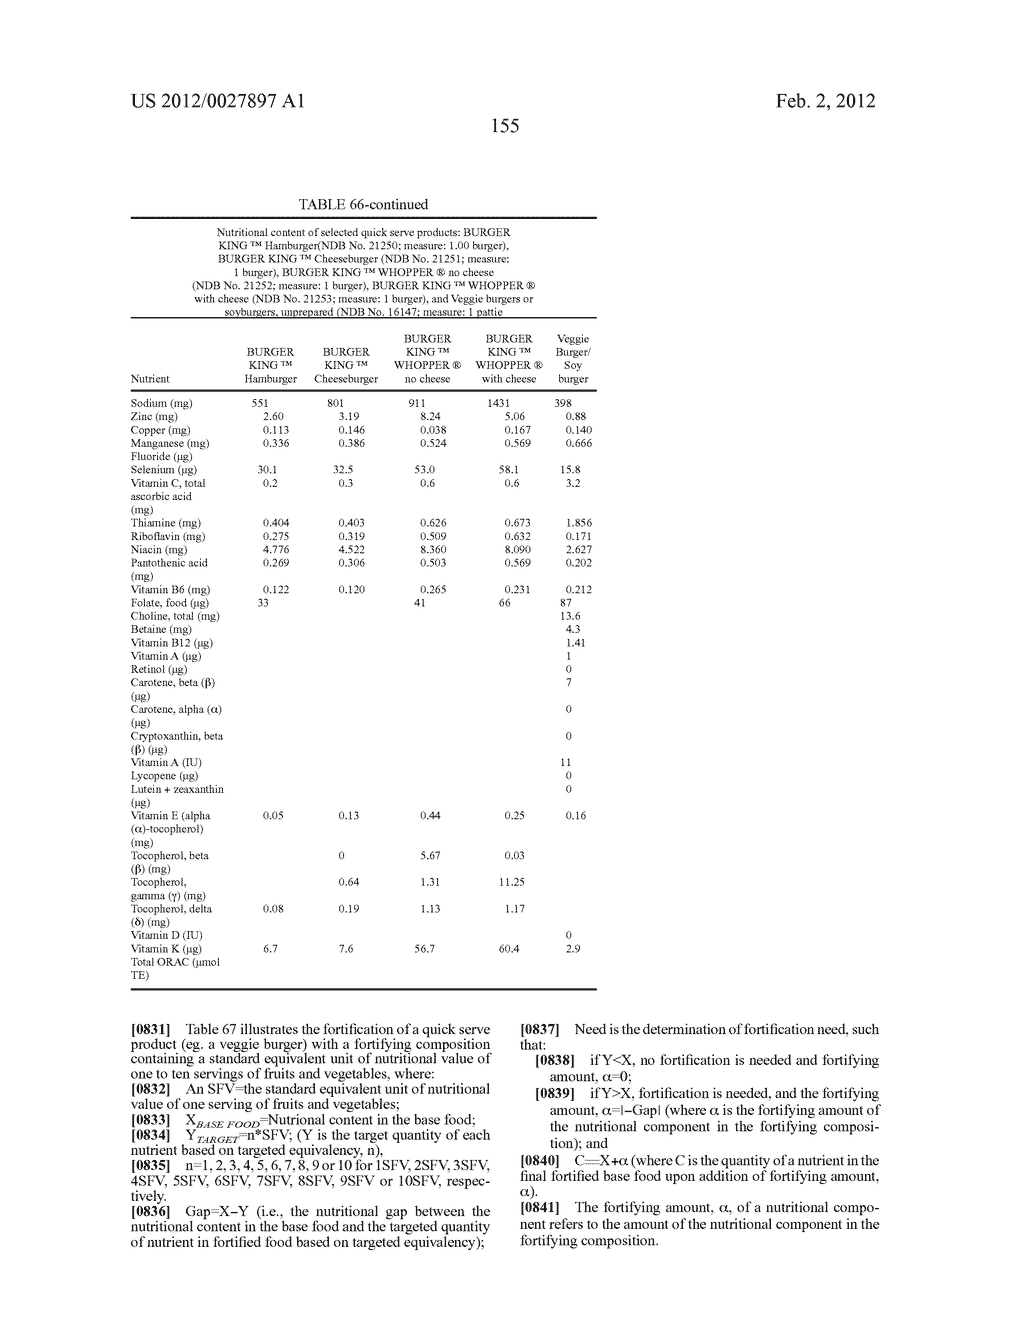 Methods For Quantifying The Complete Nutritional Value Of A Standard     Equivalent Unit Of The Nutritional Value Of One Serving Of Fruits &     Vegetables (SFV)And For Fortifying A Base Food To Contain Same For Human     Consumption - diagram, schematic, and image 156